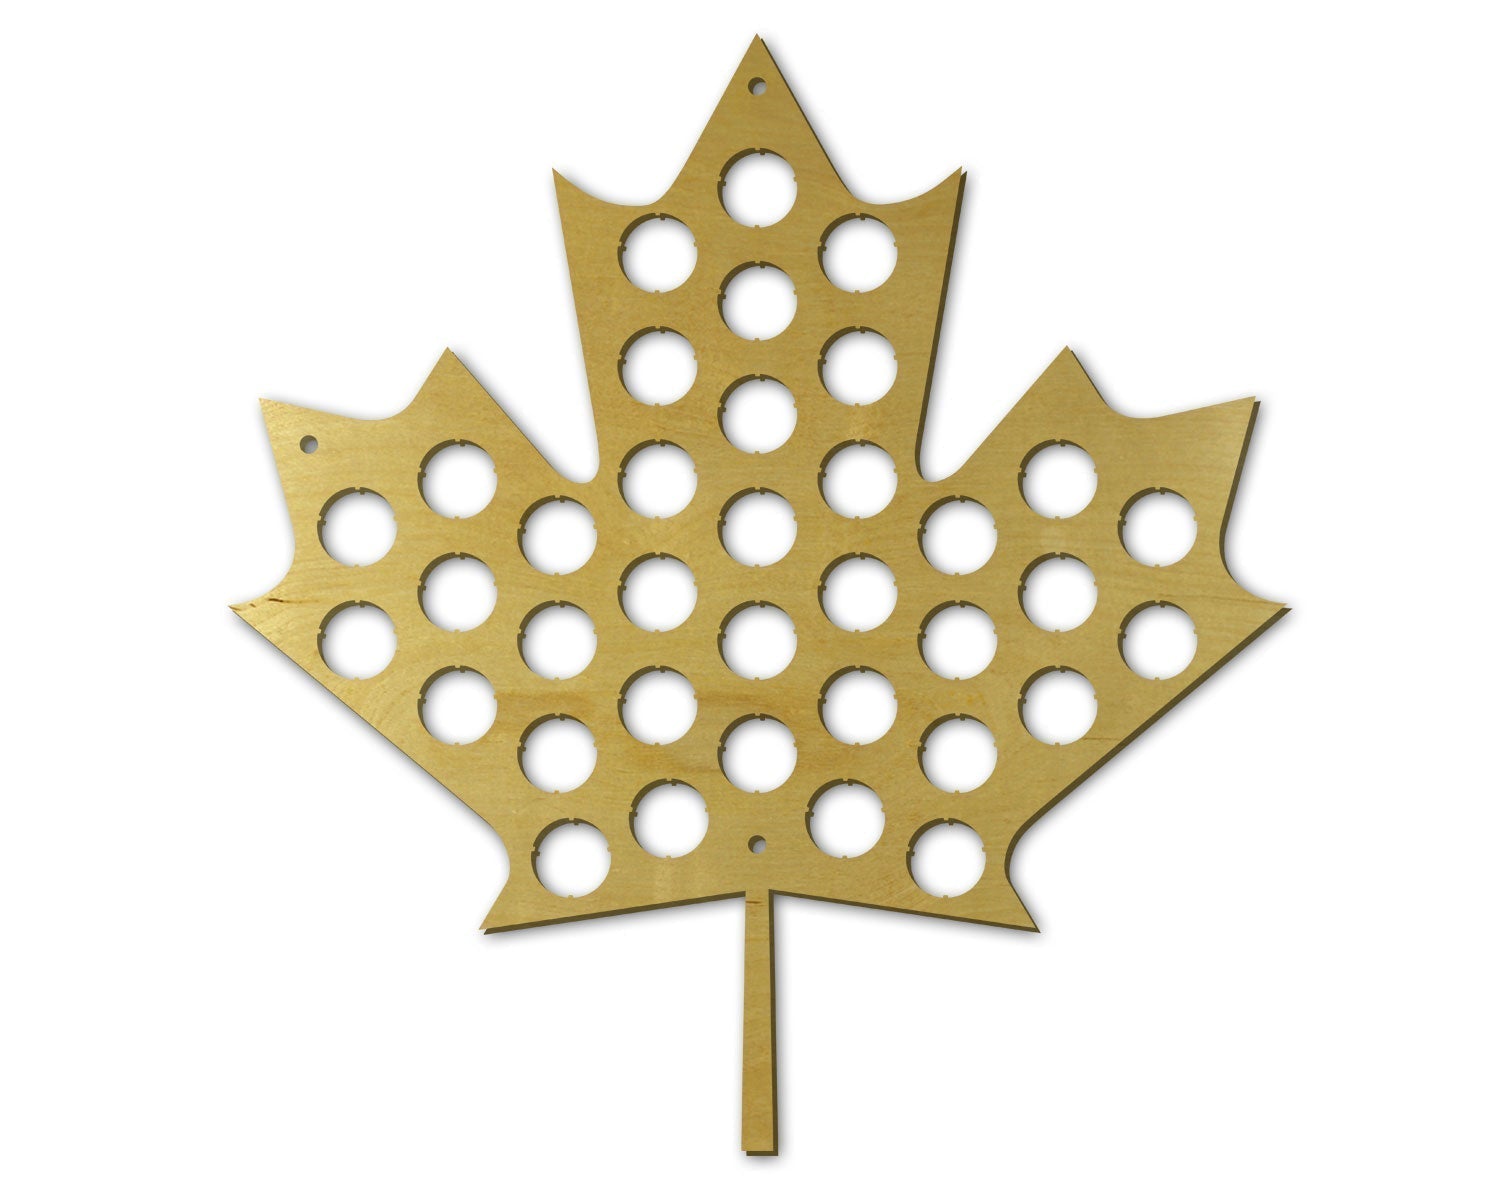 Torched Products Beer Cap Map Maple Leaf Beer Cap Holder